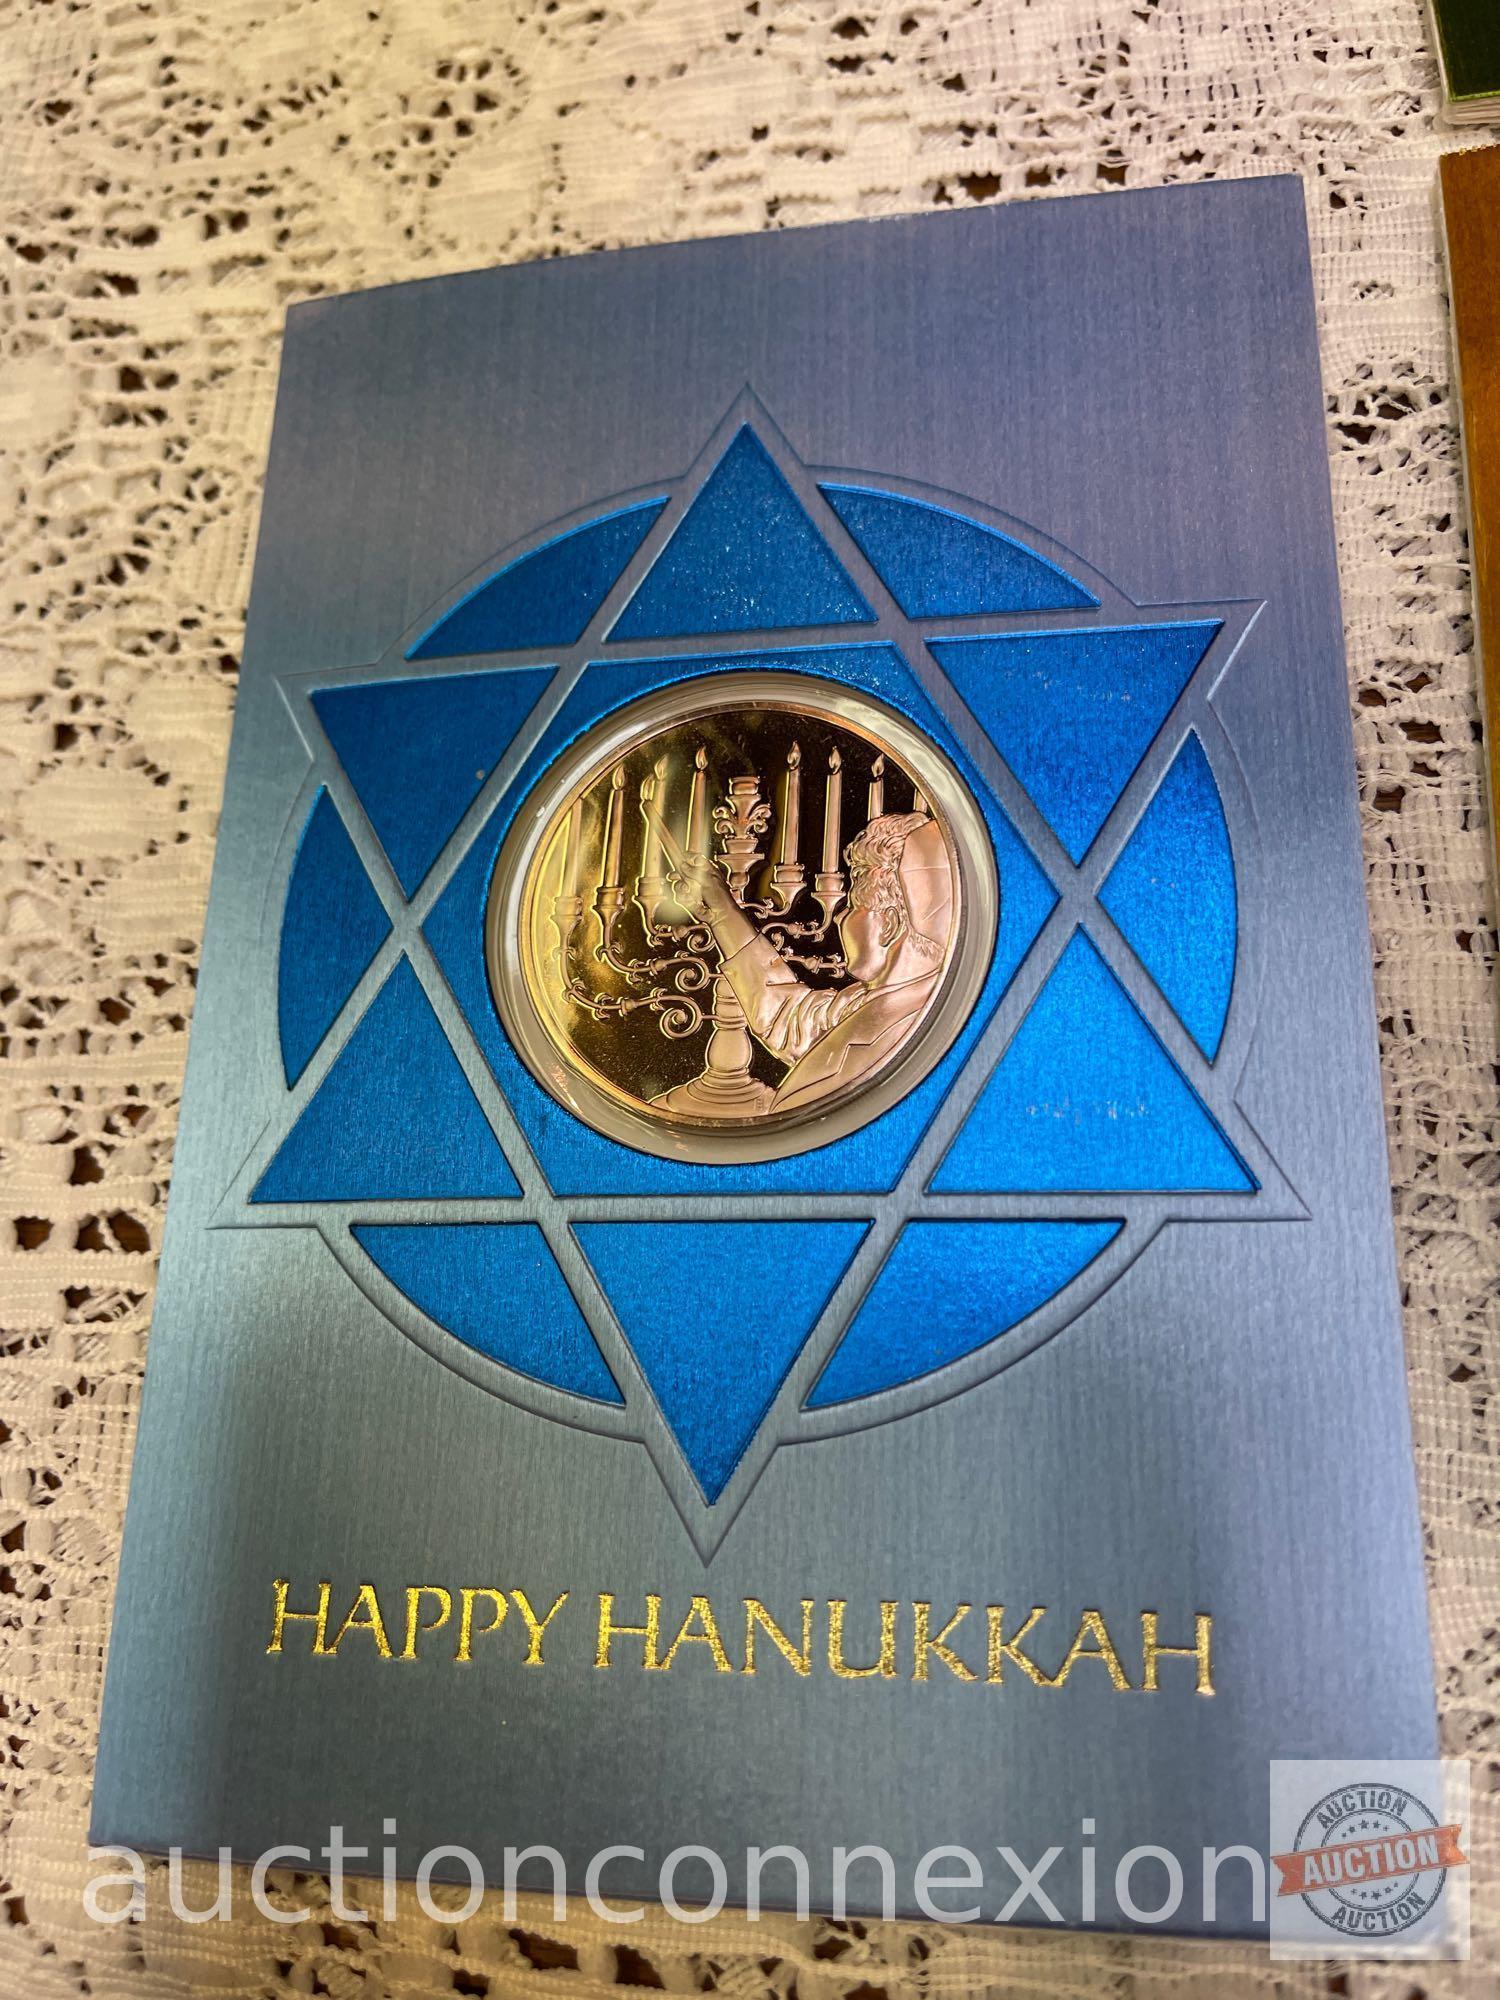 Franklin Mint Album 1973 Holiday Cards, solid bronze coins, Peace, Glory to God, Happy Hanukkah, Sea